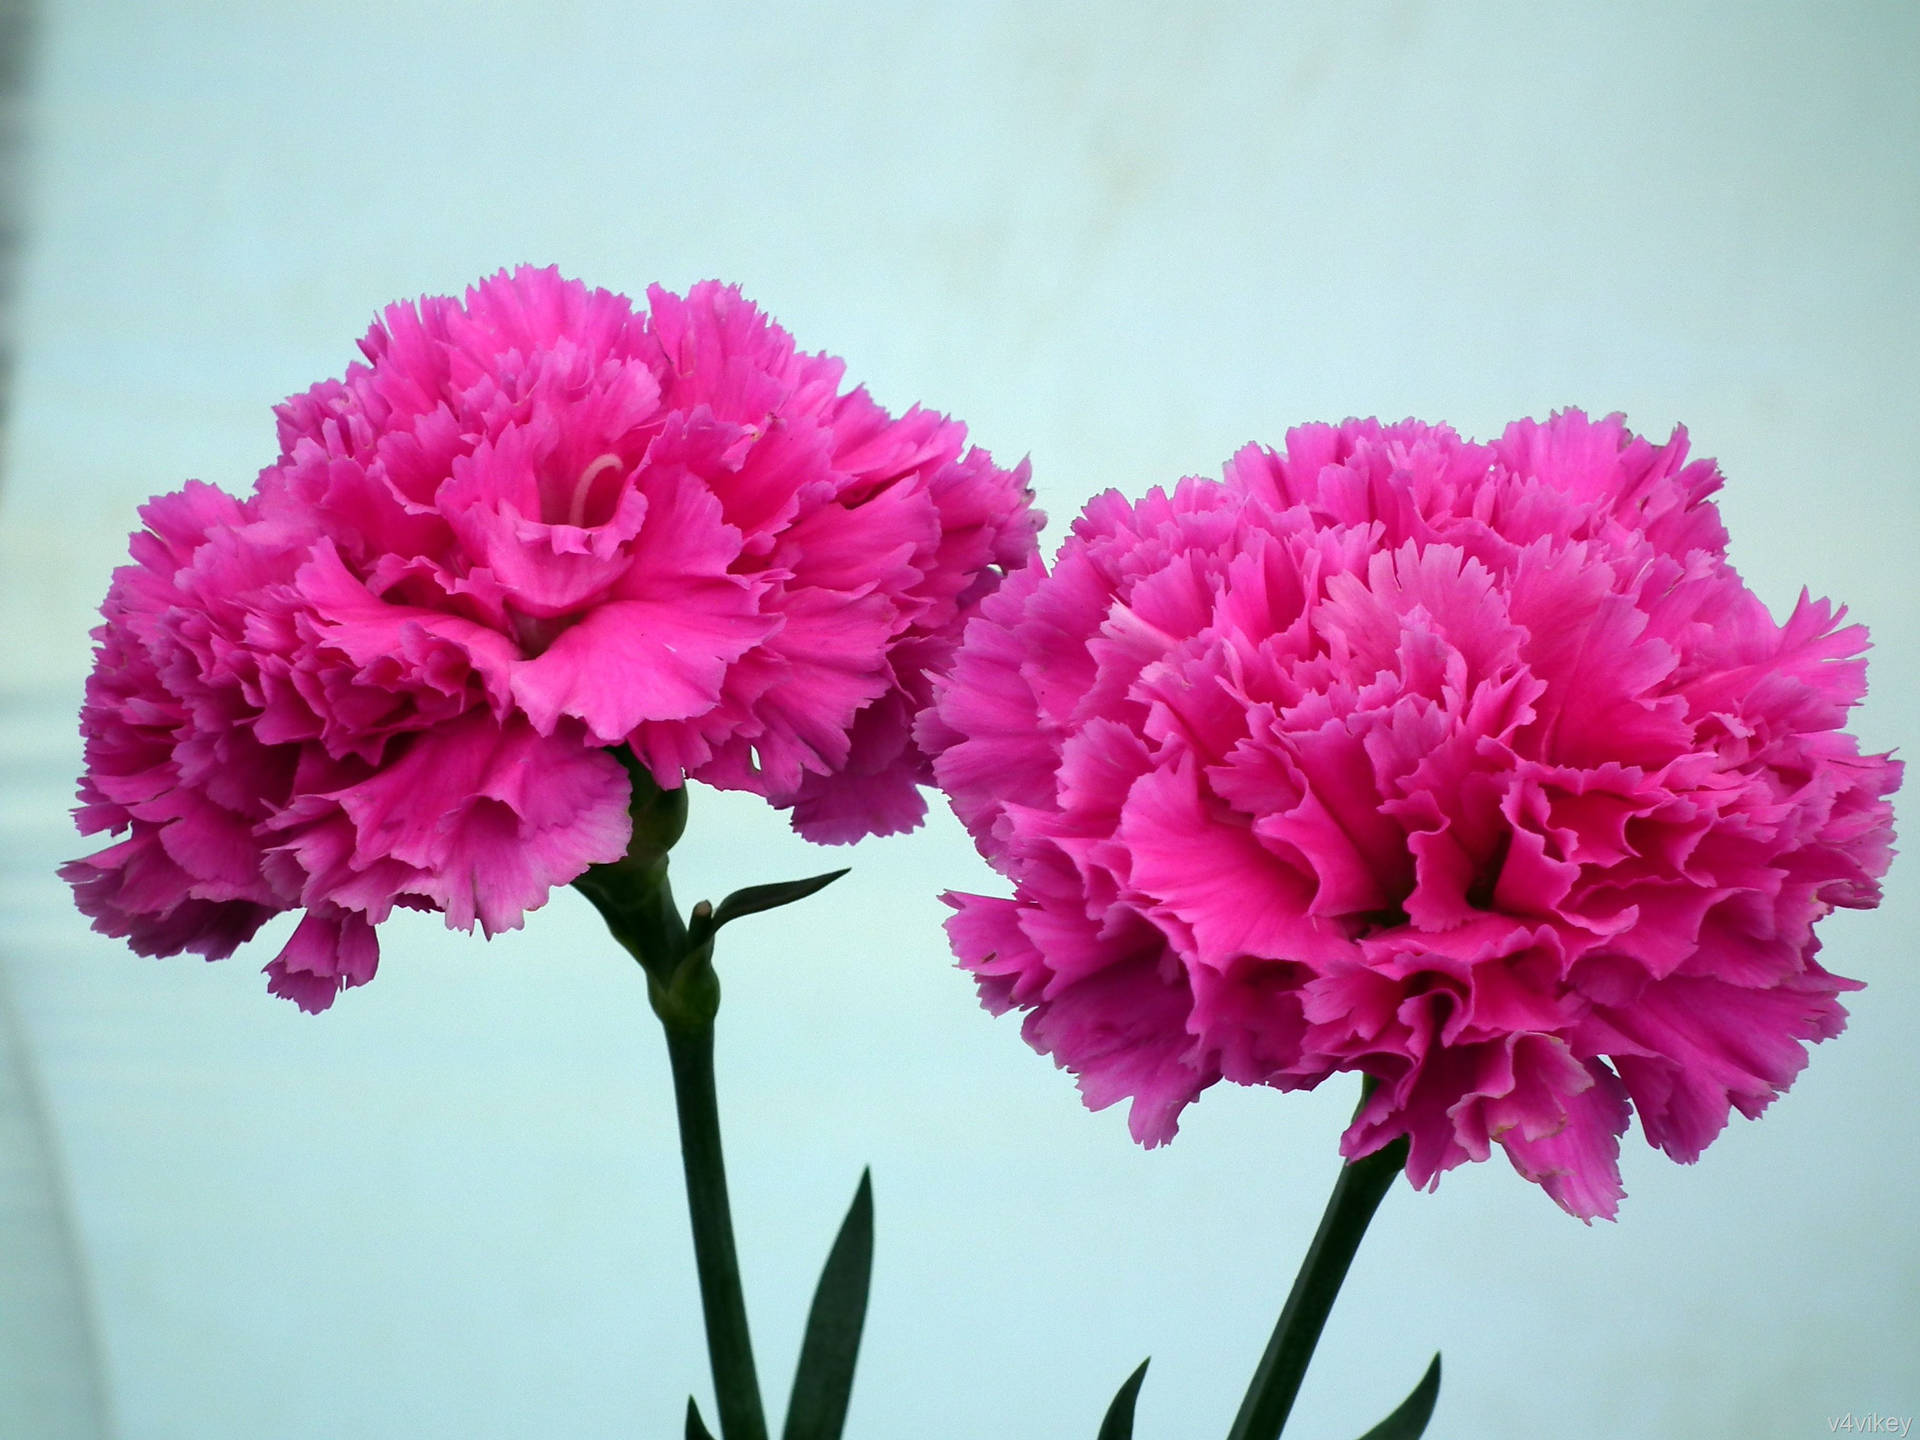 Caption: A Bouquet Of Vibrant Hot Pink Carnations